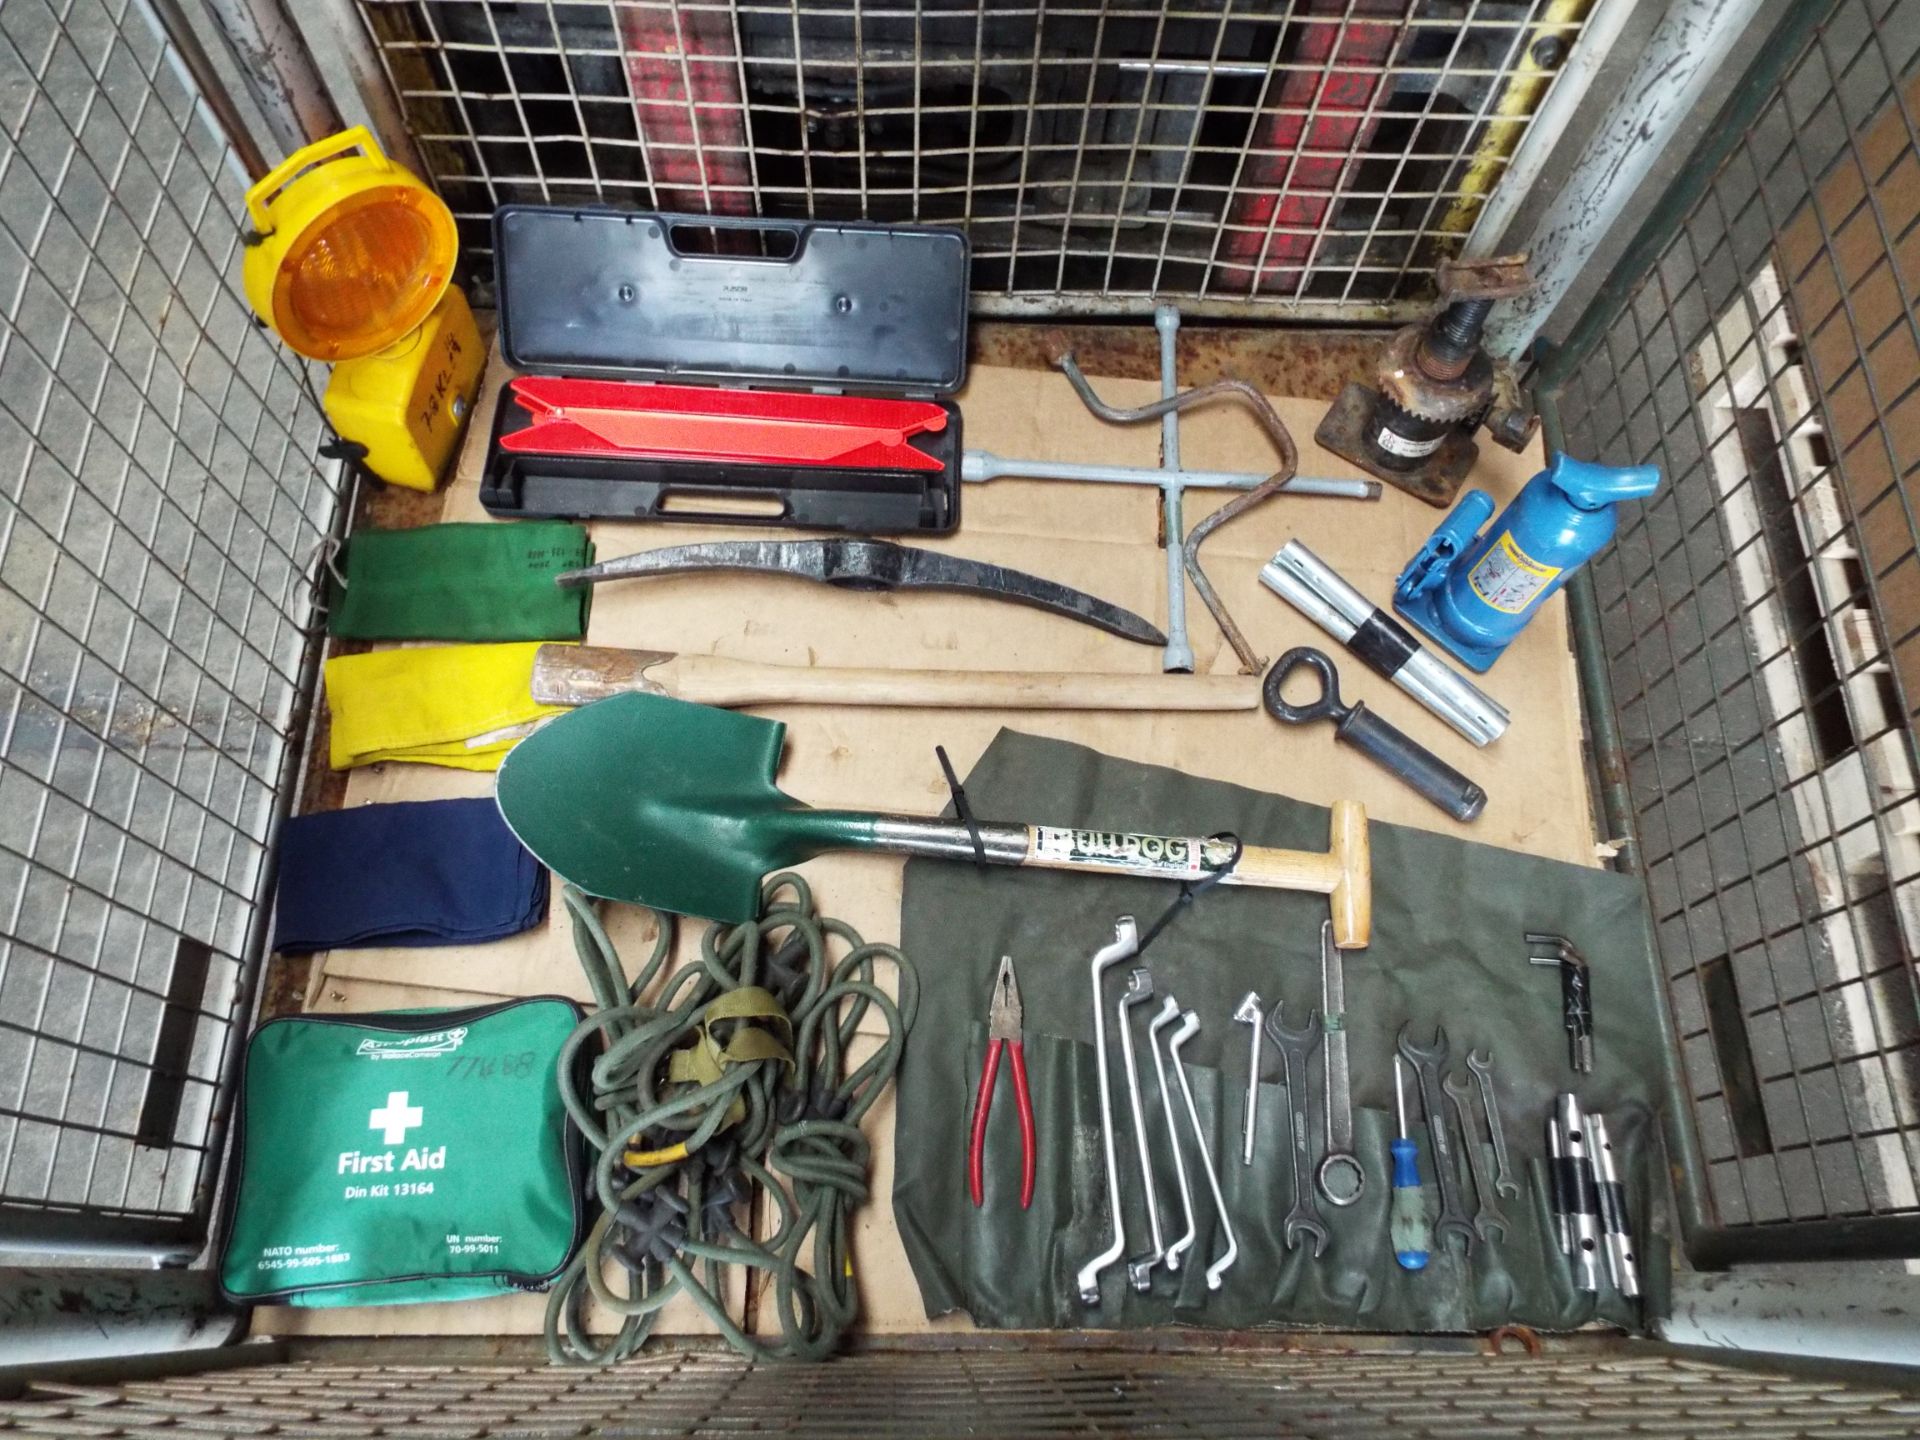 Stillage of Mixed Land Rover CES Equipment consisting of Jacks, Pioneer Tools, FFR Tool Kit etc